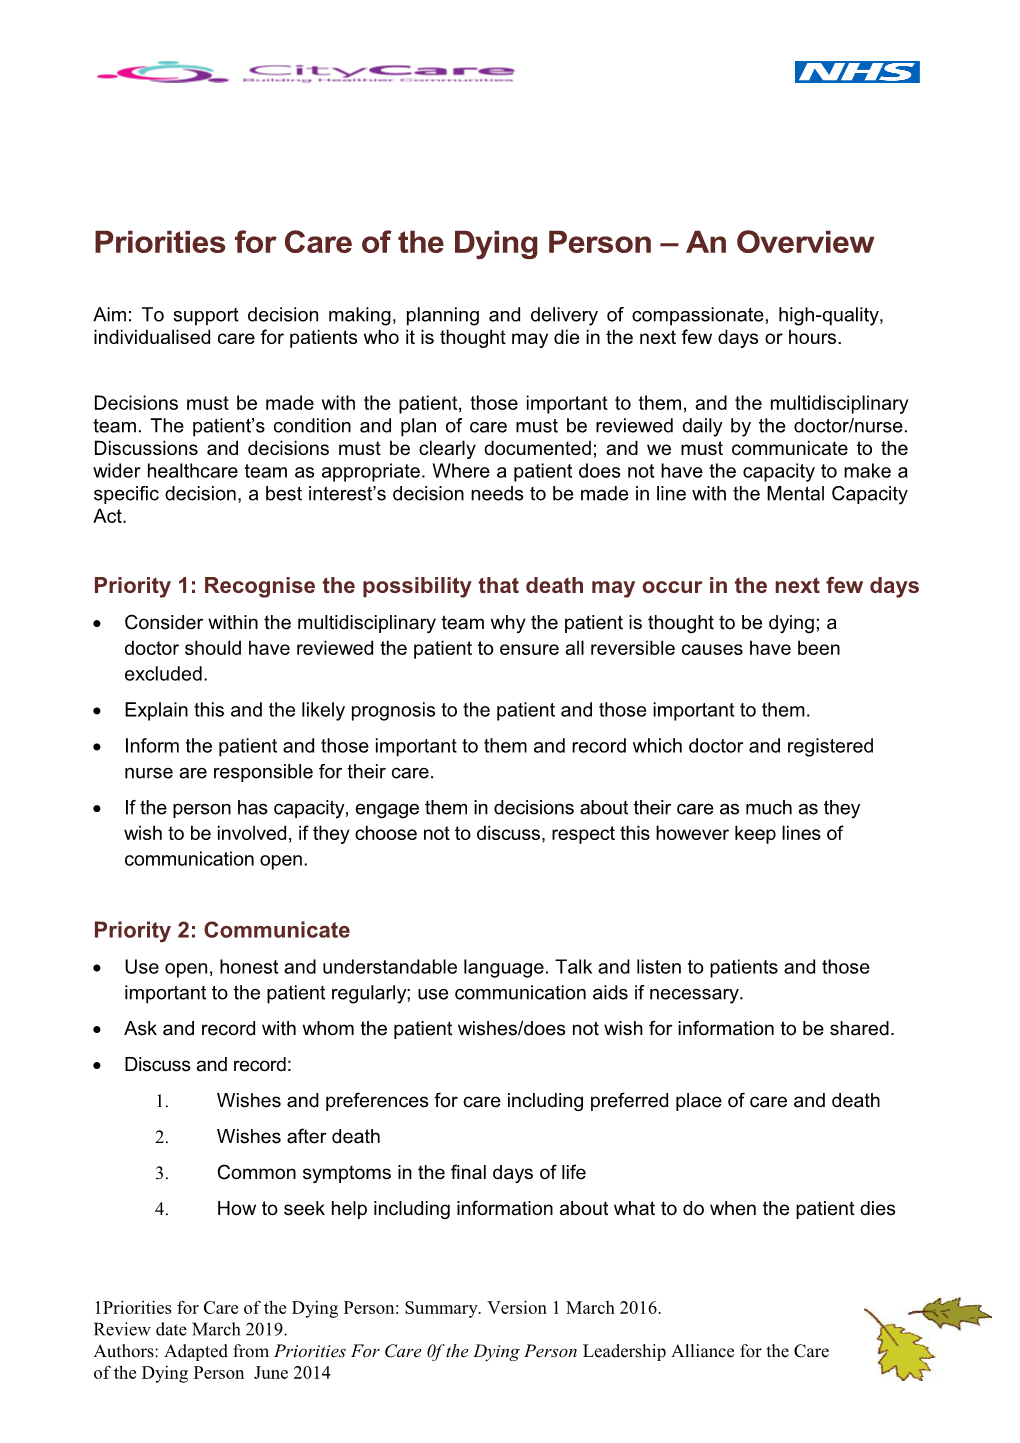 Priorities for Care of the Dying Person an Overview